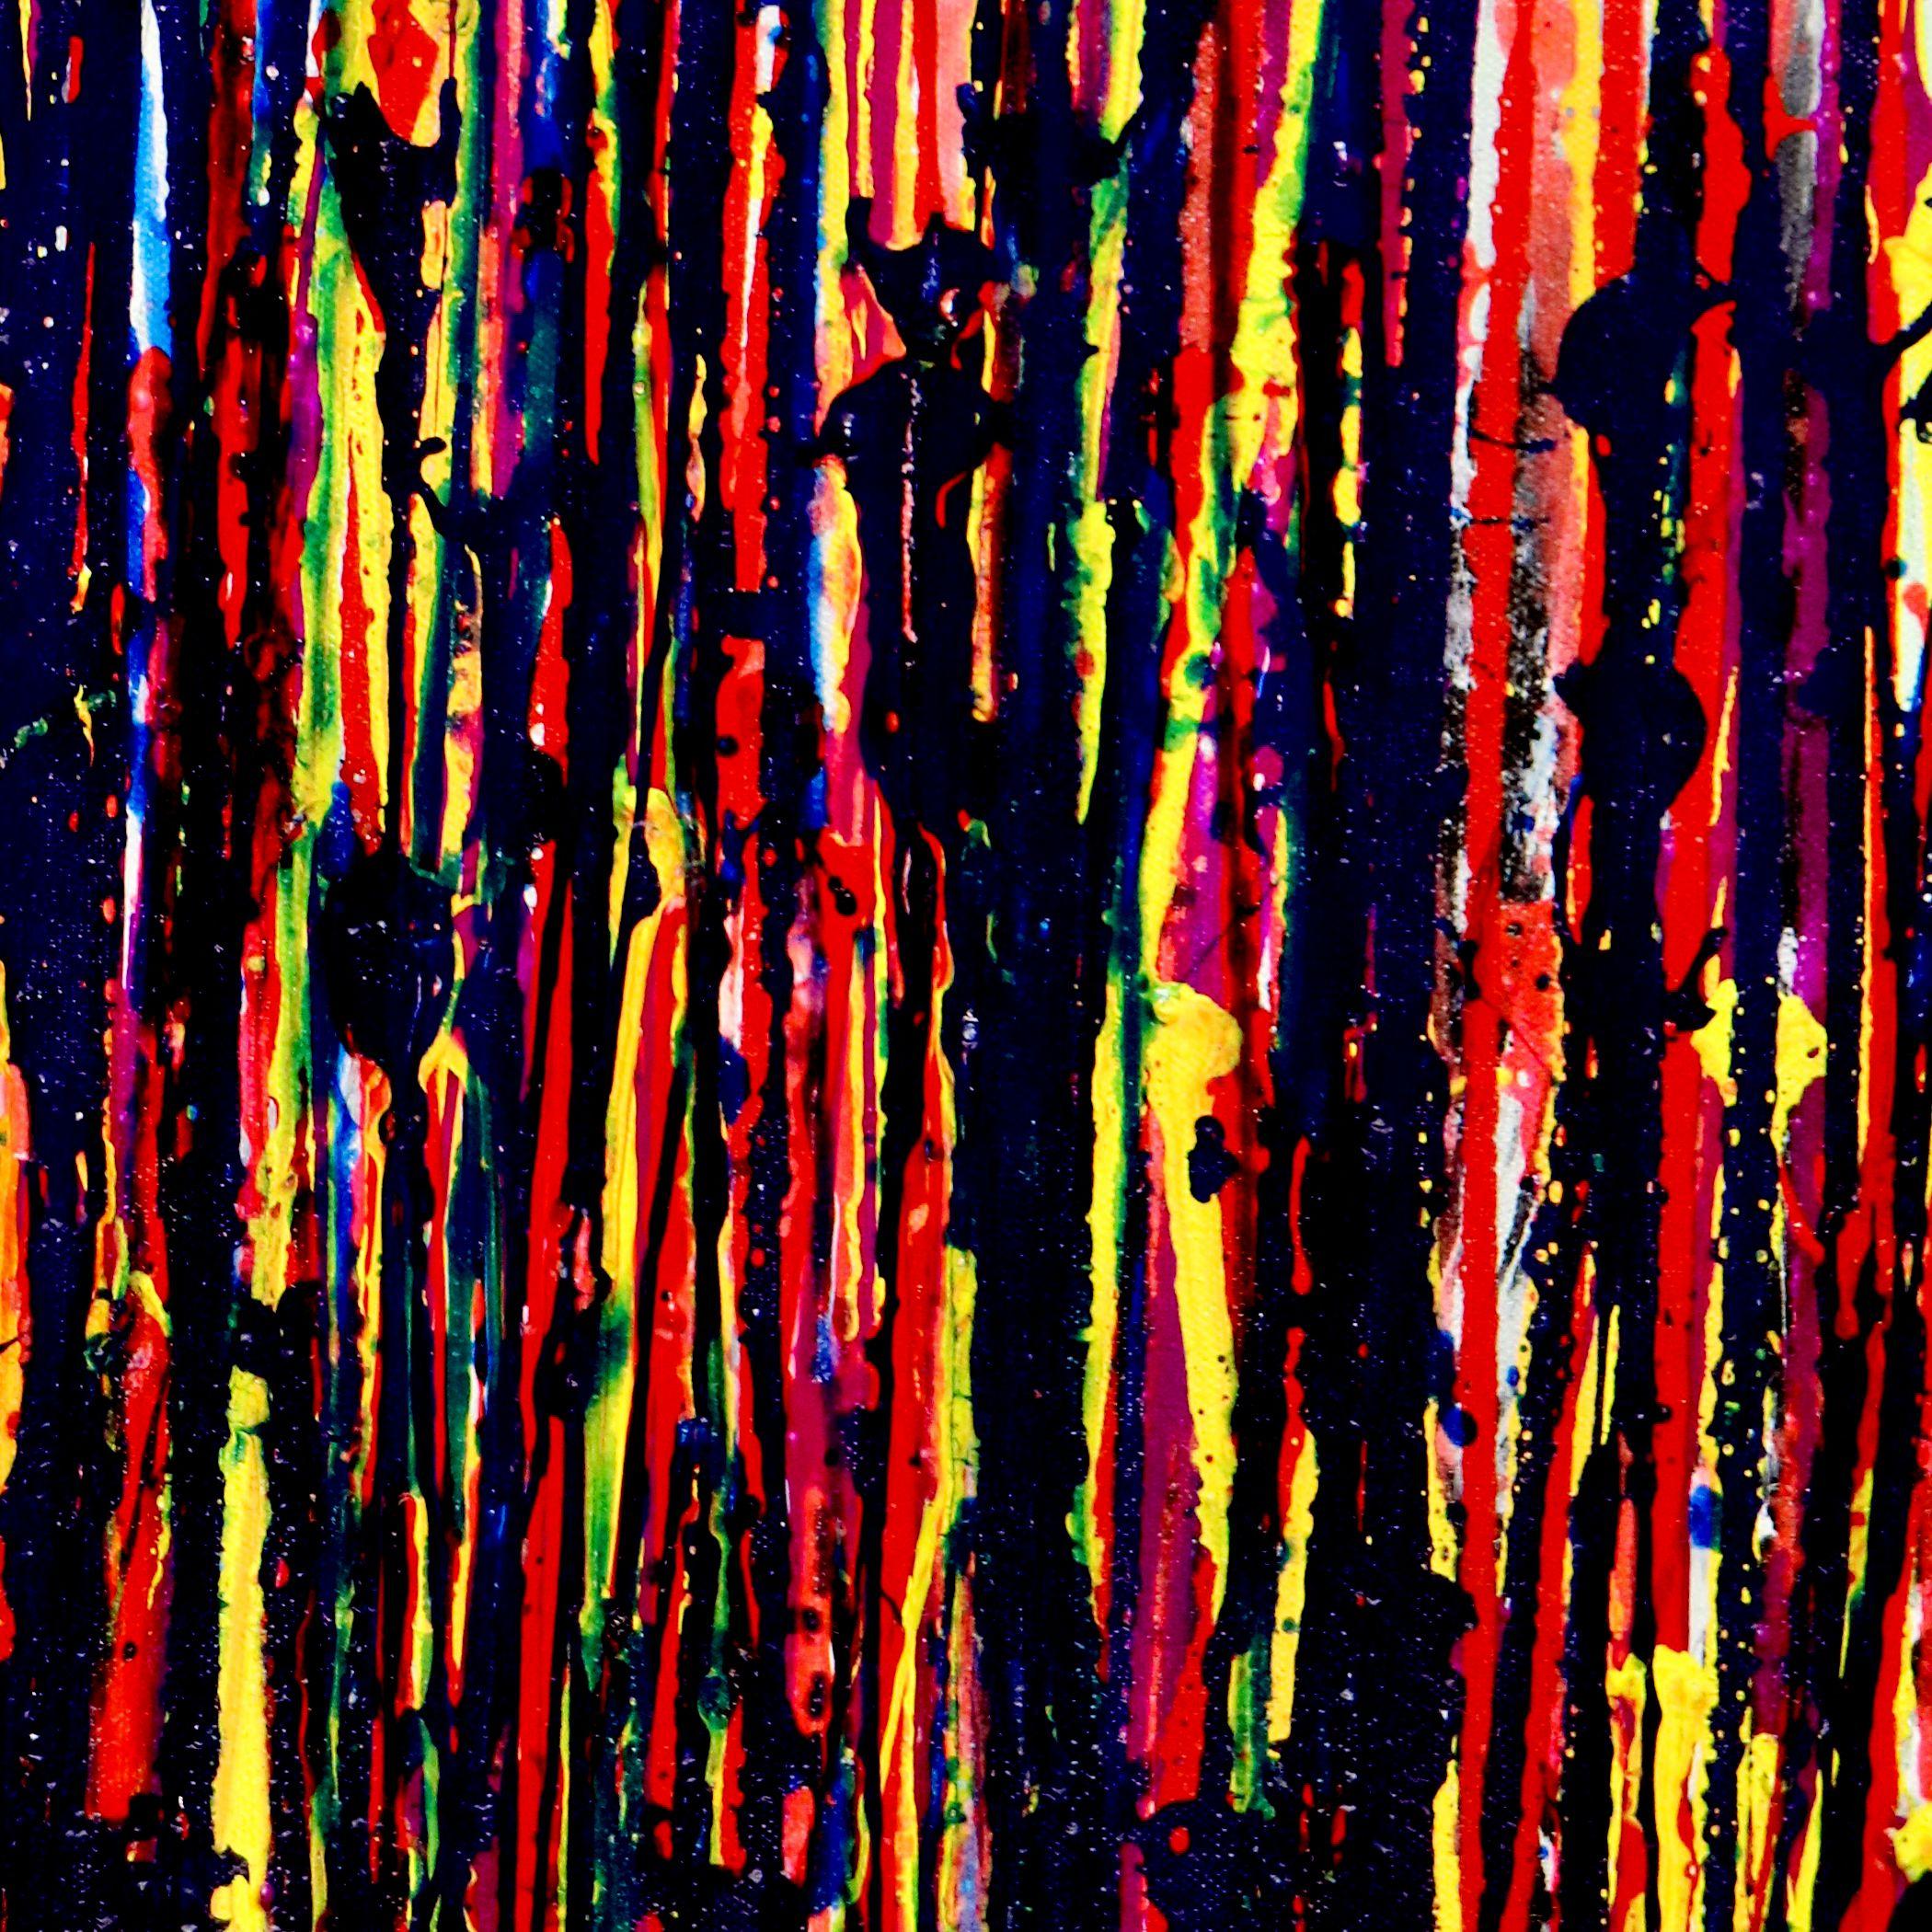 Illuminating garden spectra 2, Painting, Acrylic on Canvas - Brown Abstract Painting by Nestor Toro